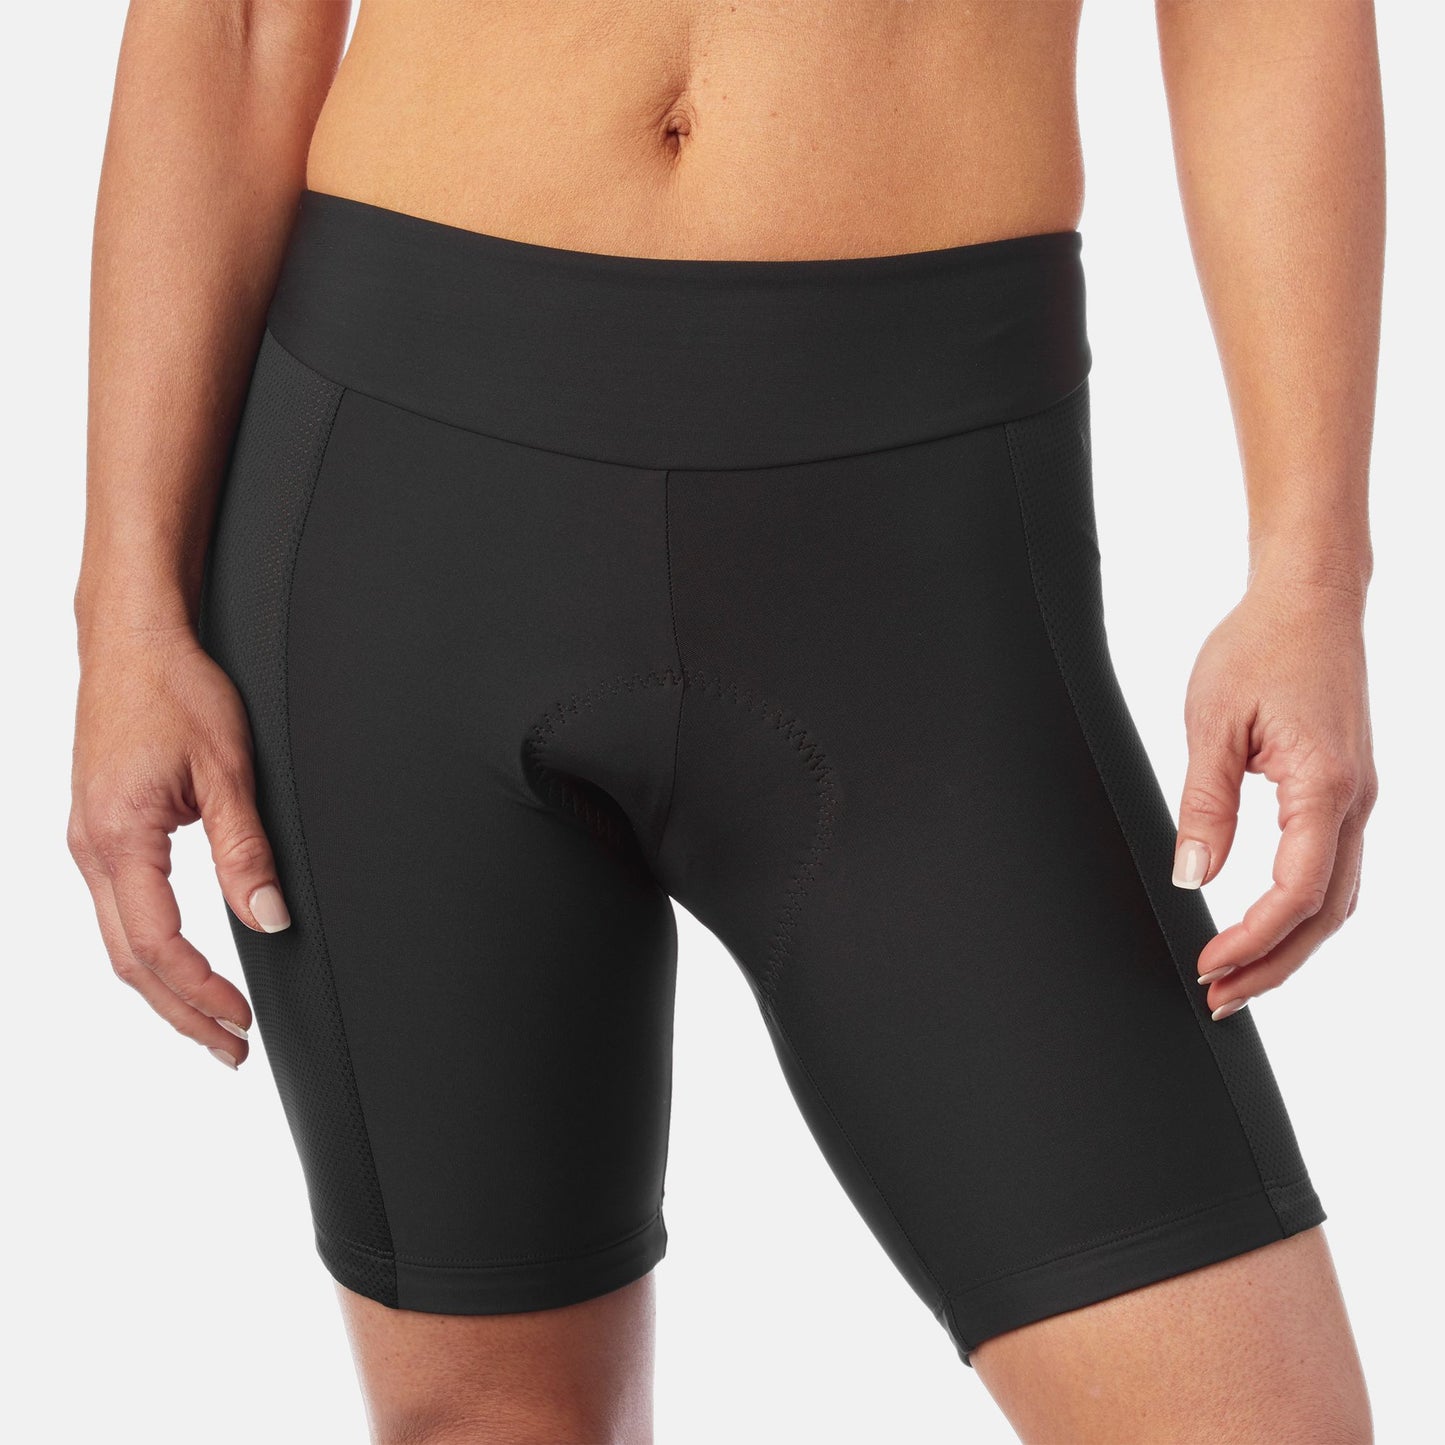 Giro Arc with Liner Womens Bicycle Shorts Black 4